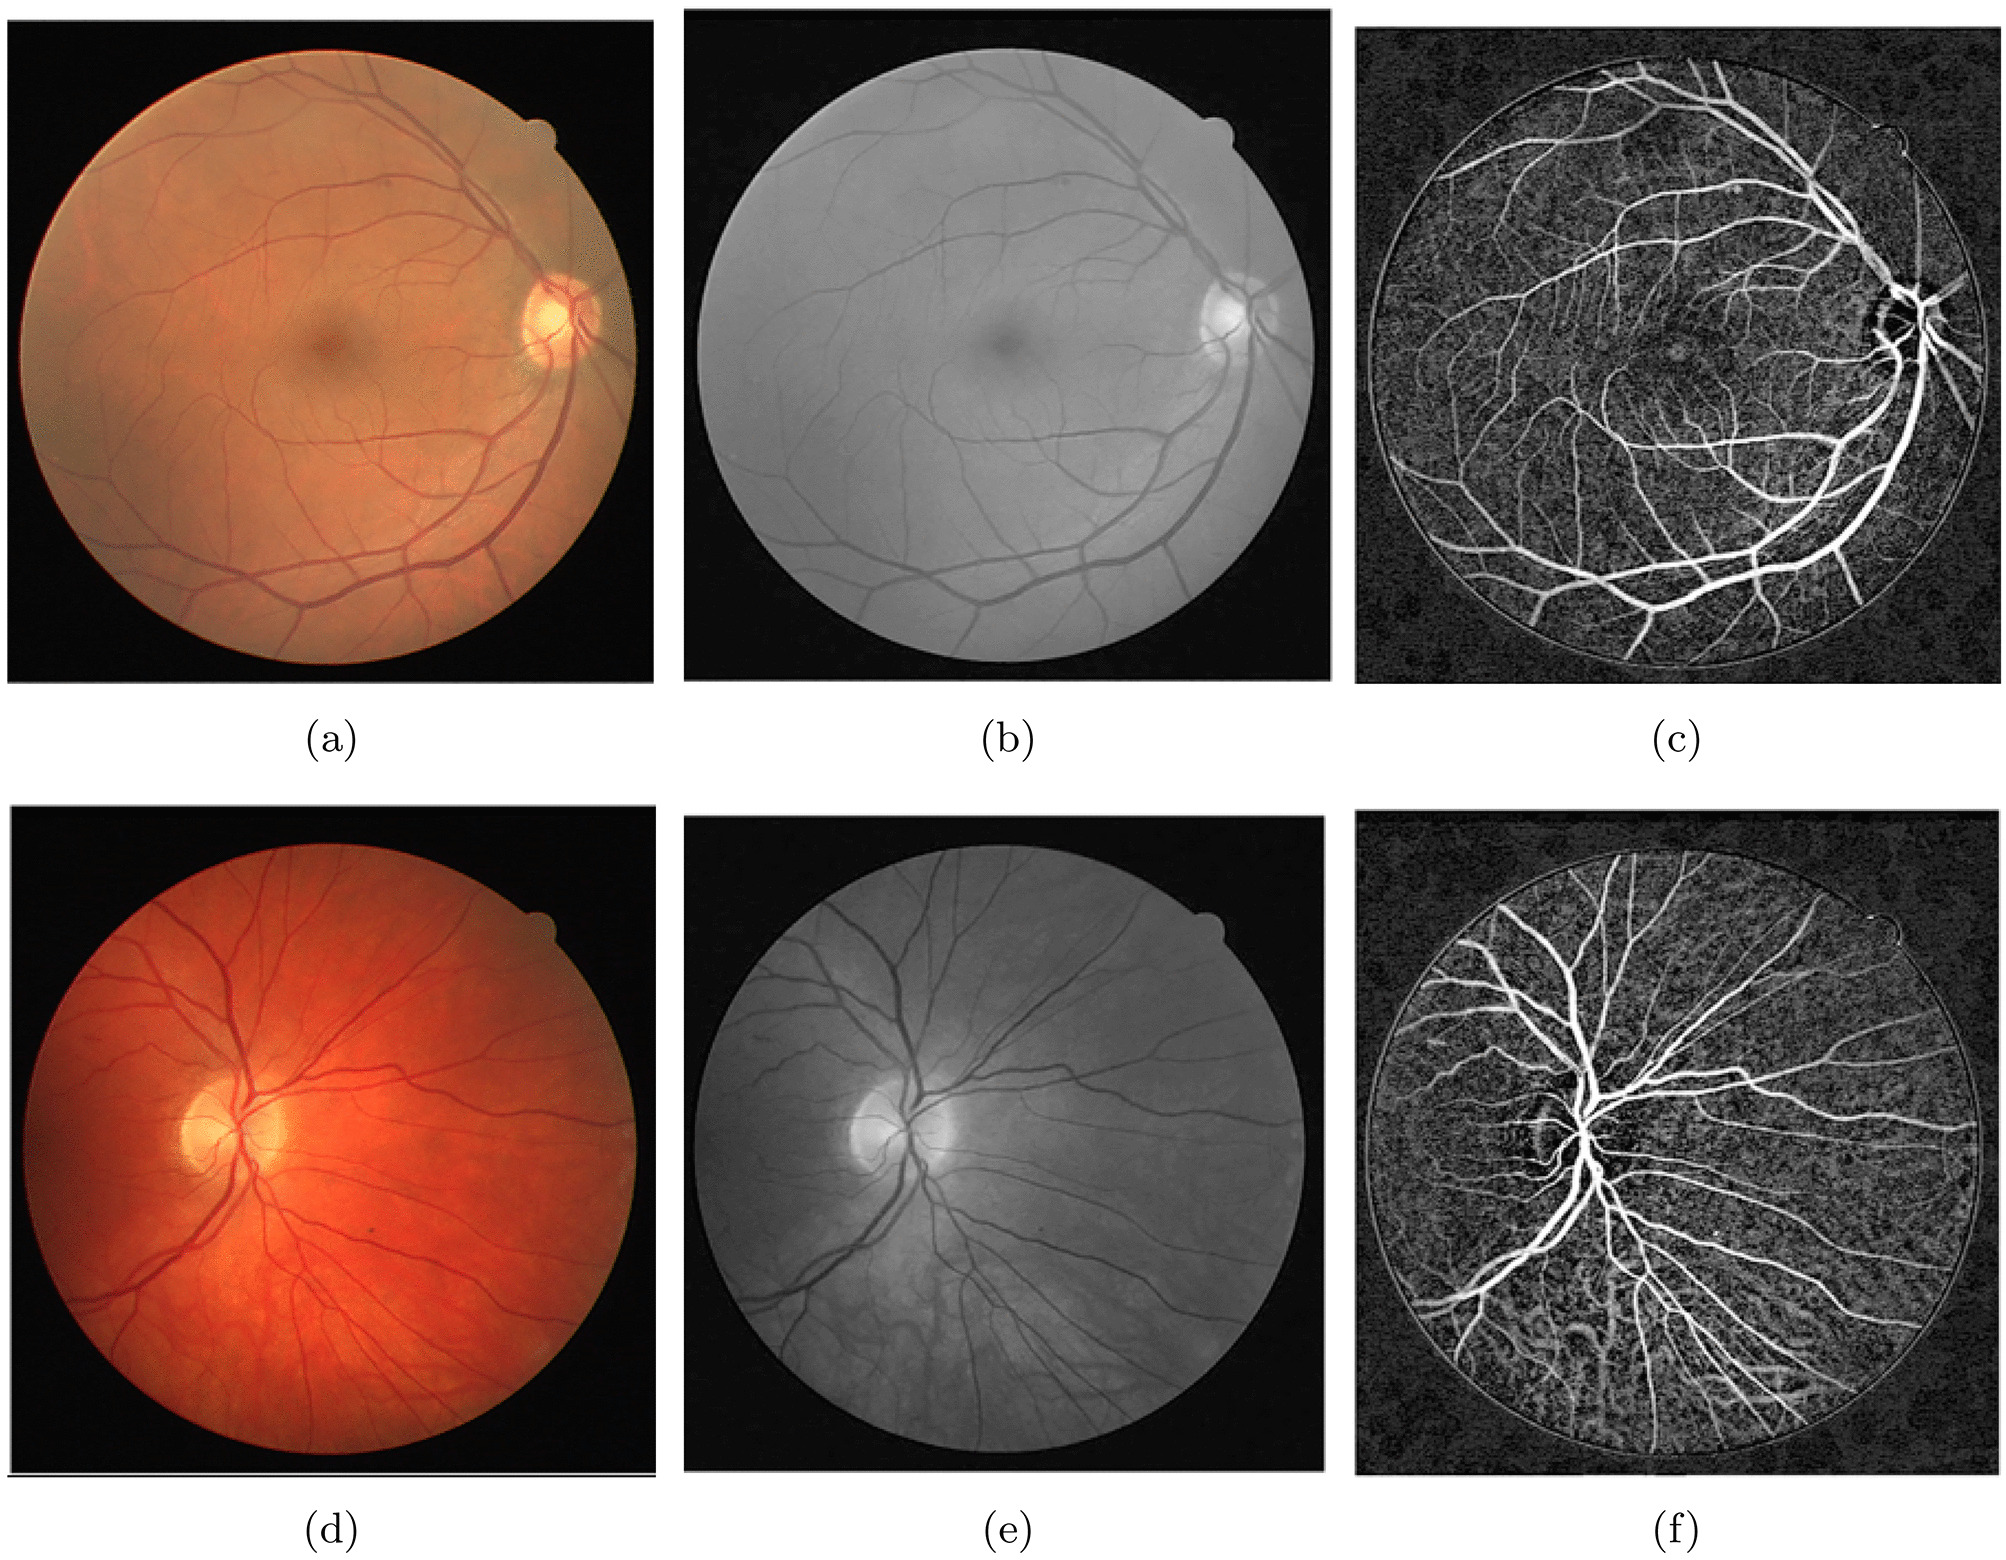 Systematic Review of Retinal Blood Vessels Segmentation Based on AI-driven Technique